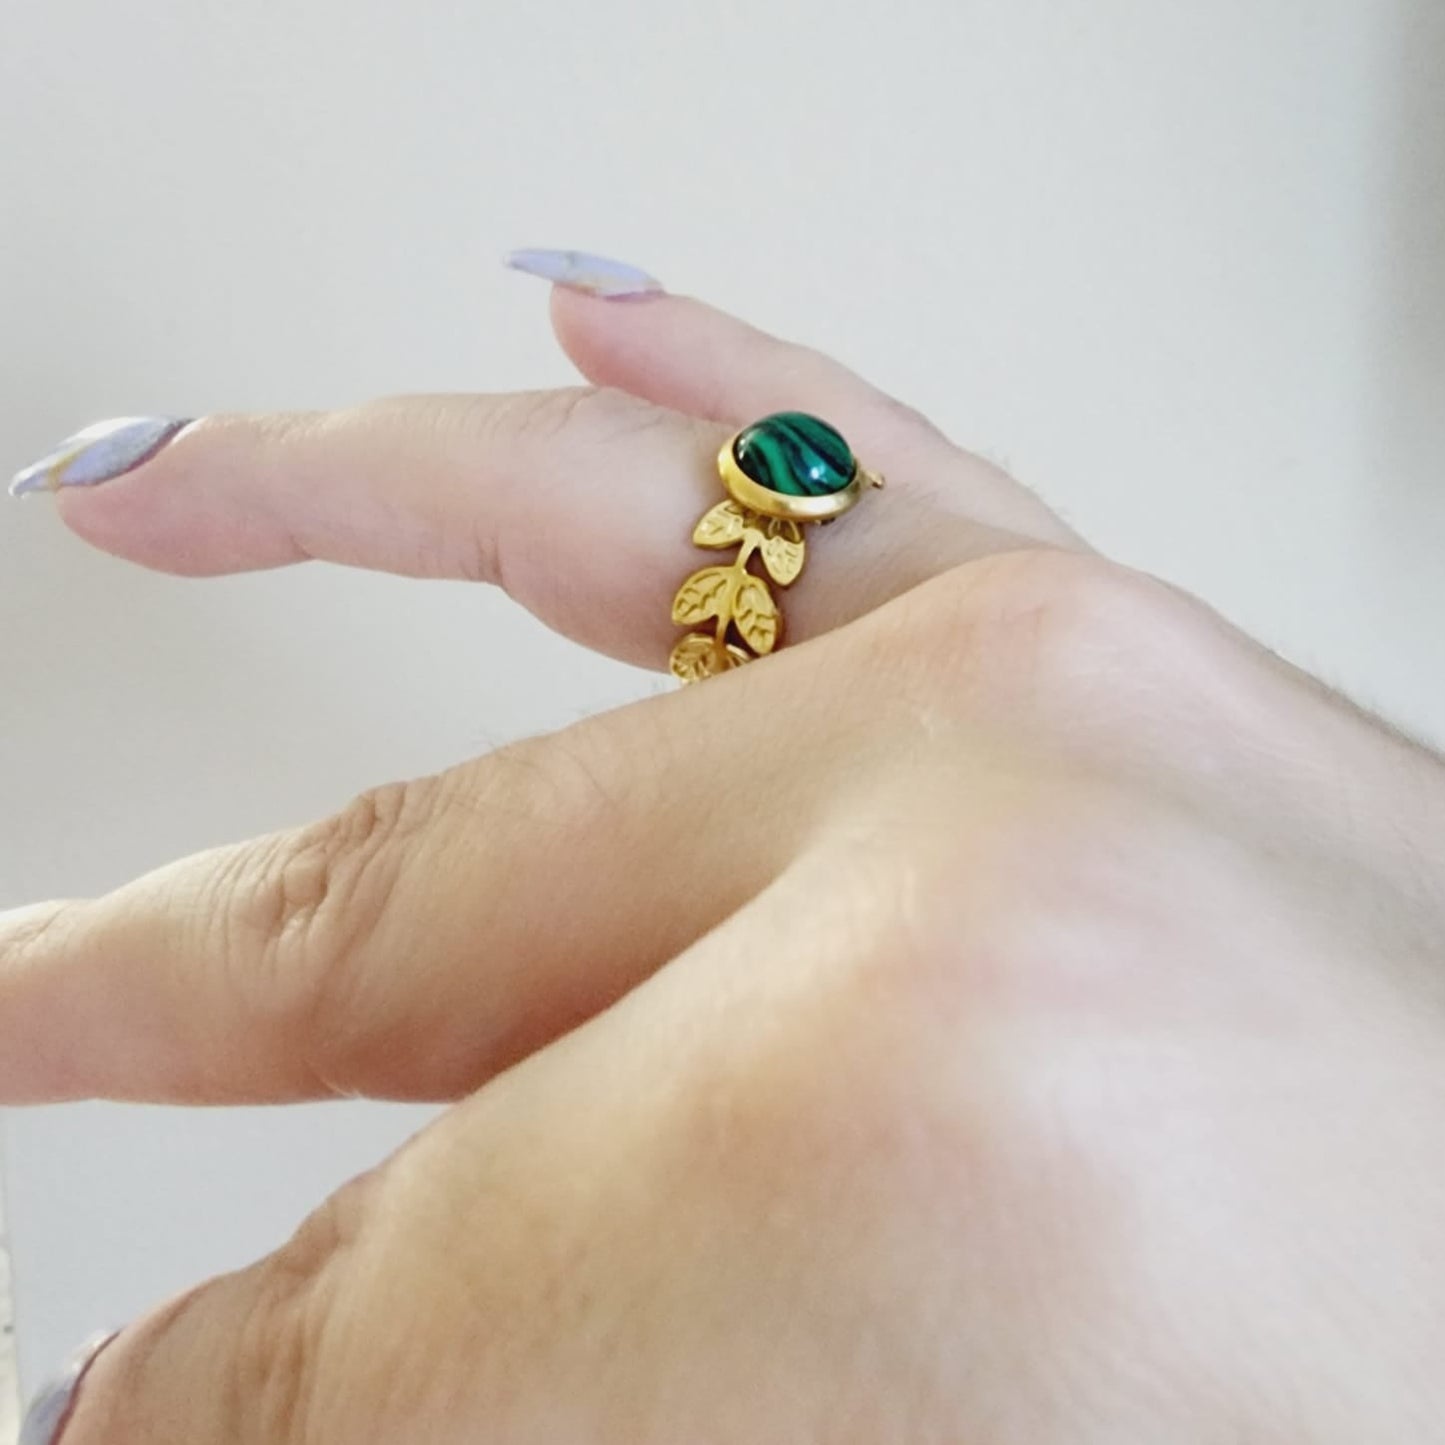 Emerald ring, Star ring, Adjustable bold ring, Adjustable Gold ring, Delicate and simple ring, chunky star ring, green gold ring, waterproof ring, hypoallergenic ring, untarnish ring, anti tarnish ring, anillo de estrellas, Water Resistant Jewelry, Green Stone ring, green leaves adjustable ring